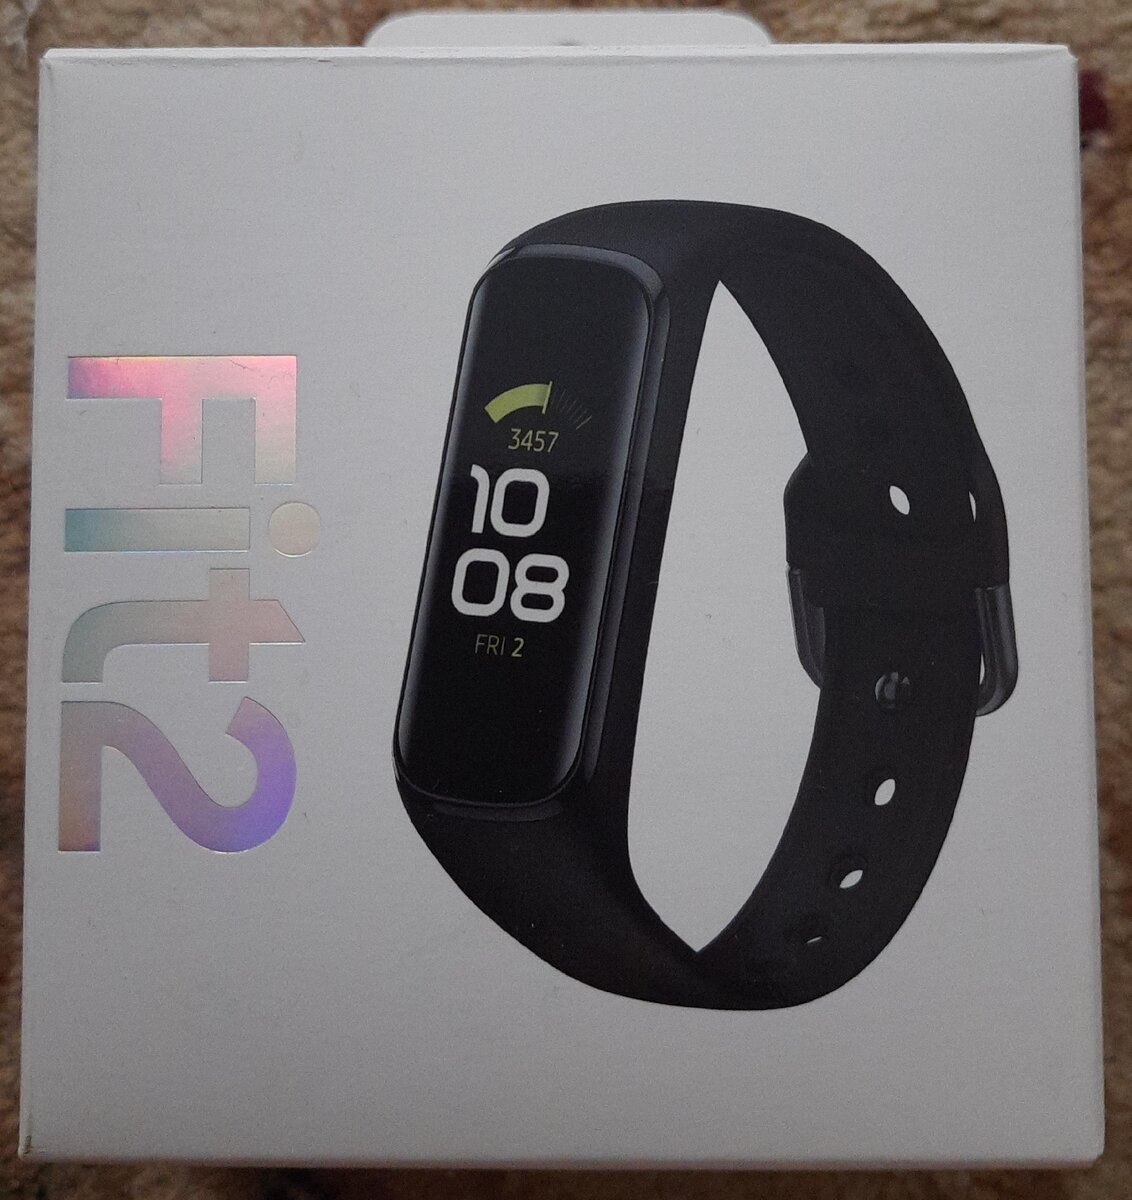 Смарт часы samsung galaxy fit 3 graphite. Samsung Galaxy Fit 2. Смарт-часы Samsung Galaxy fit3. Смарт-часы Samsung Galaxy Fit 3 Silver. Самсунг галакси Fit 4.